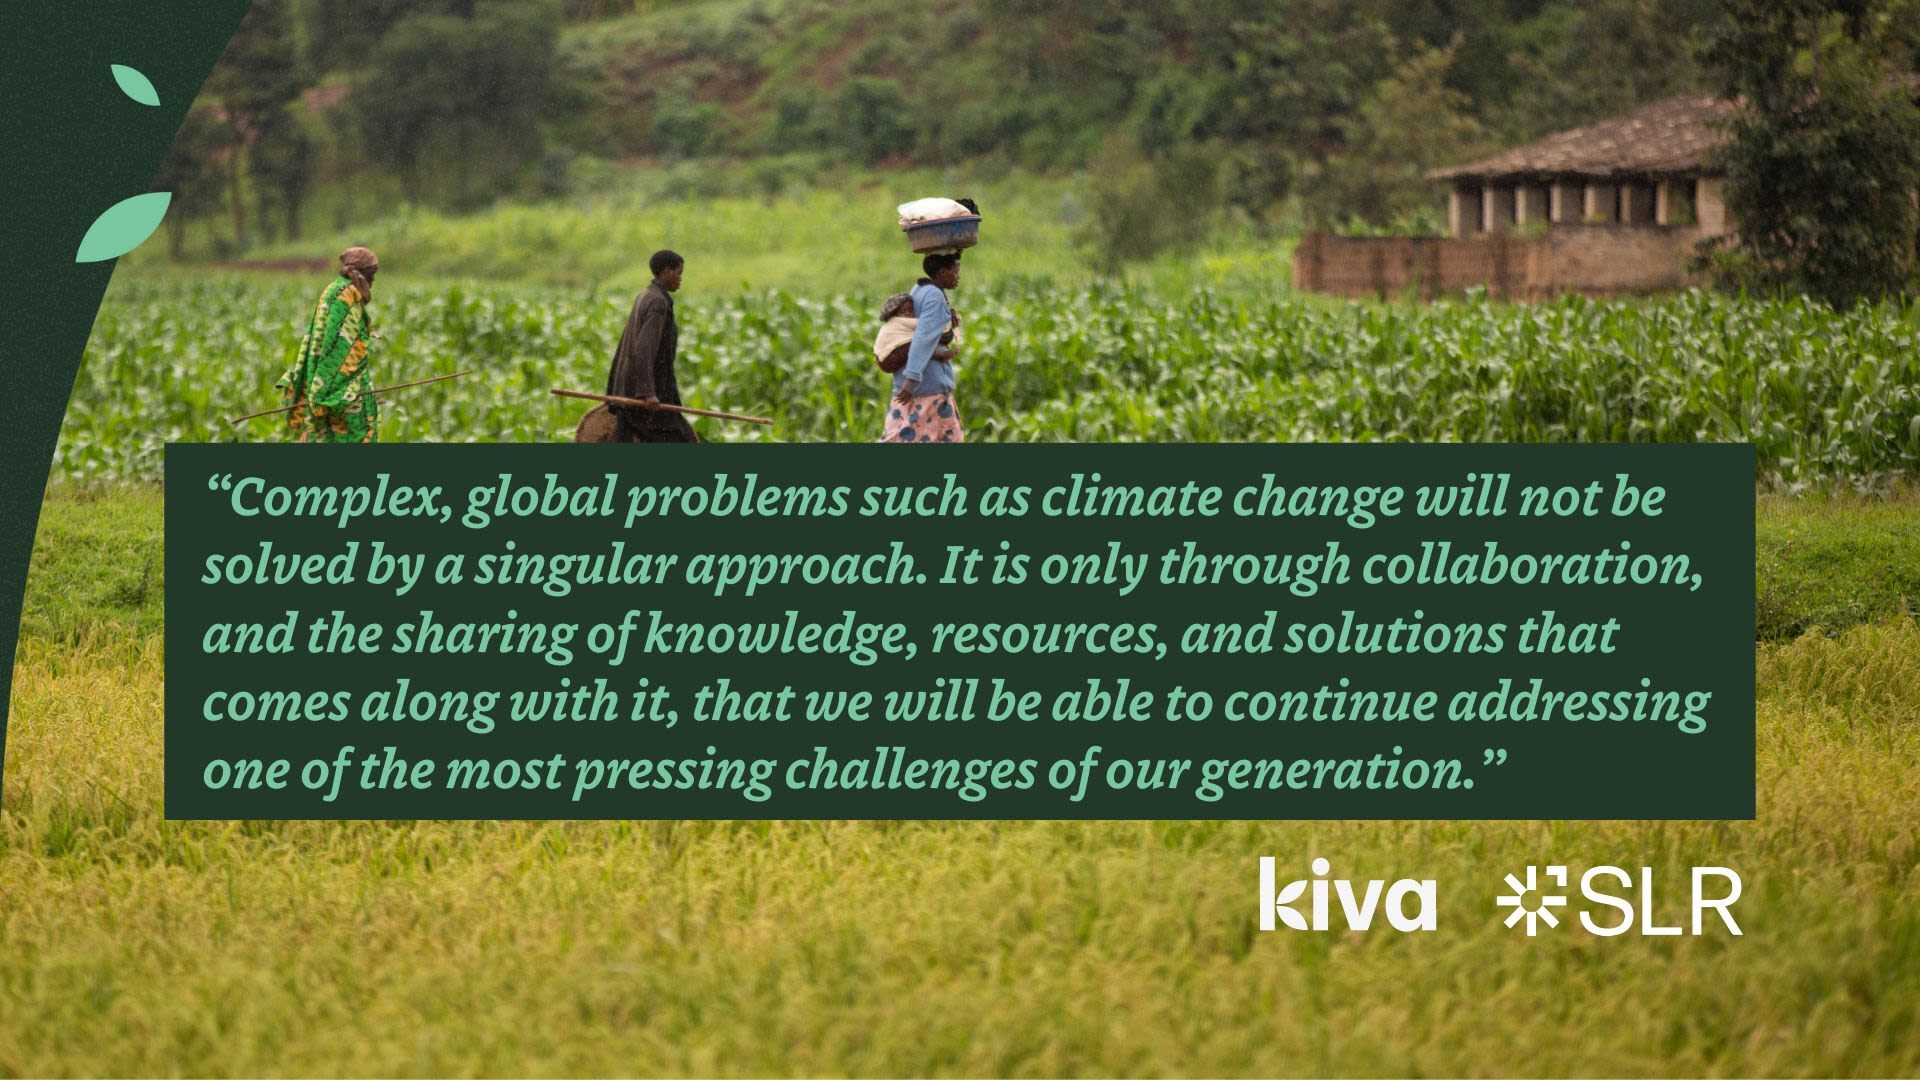 Quote image: "Complex, global problems such as climate change will not be solved by a singular approach. It is only through collaboration, and the sharing of knowledge, resources, and solutions that comes along with it, that we will be able to continue addressing one of the most pressing challenges of our generation."